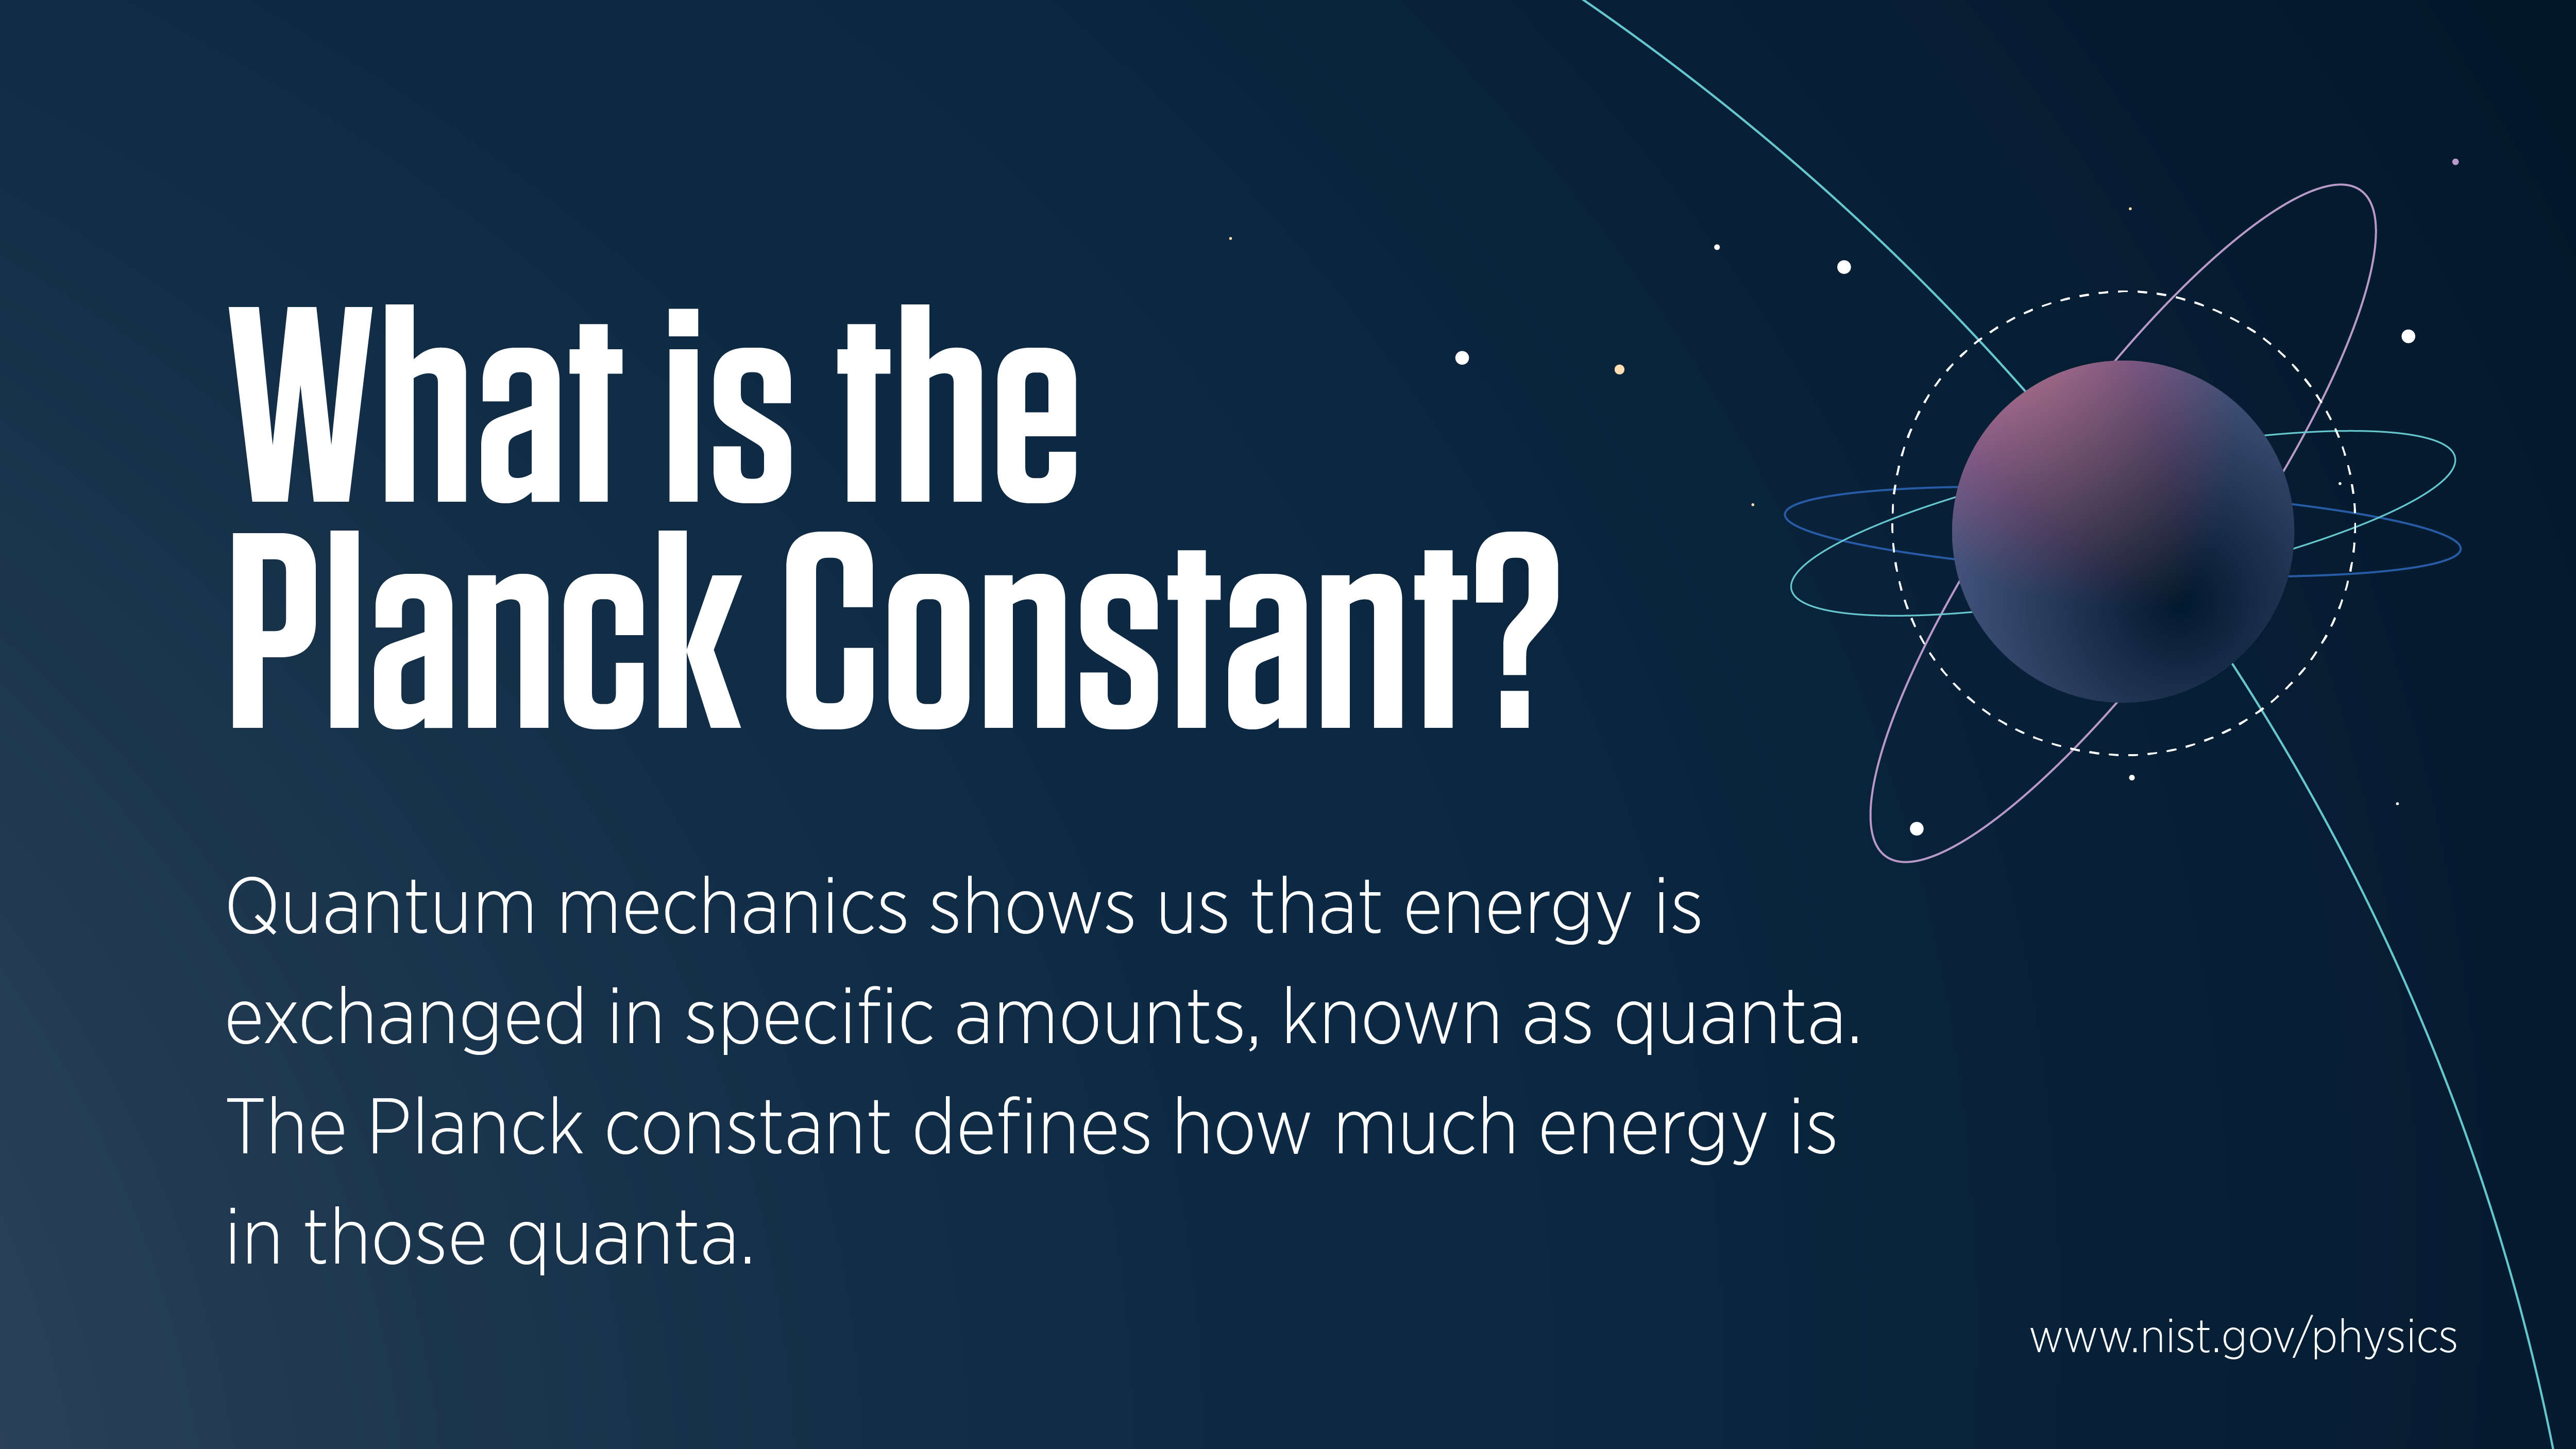 Illustration says "What is the Planck Constant?" with explanation.